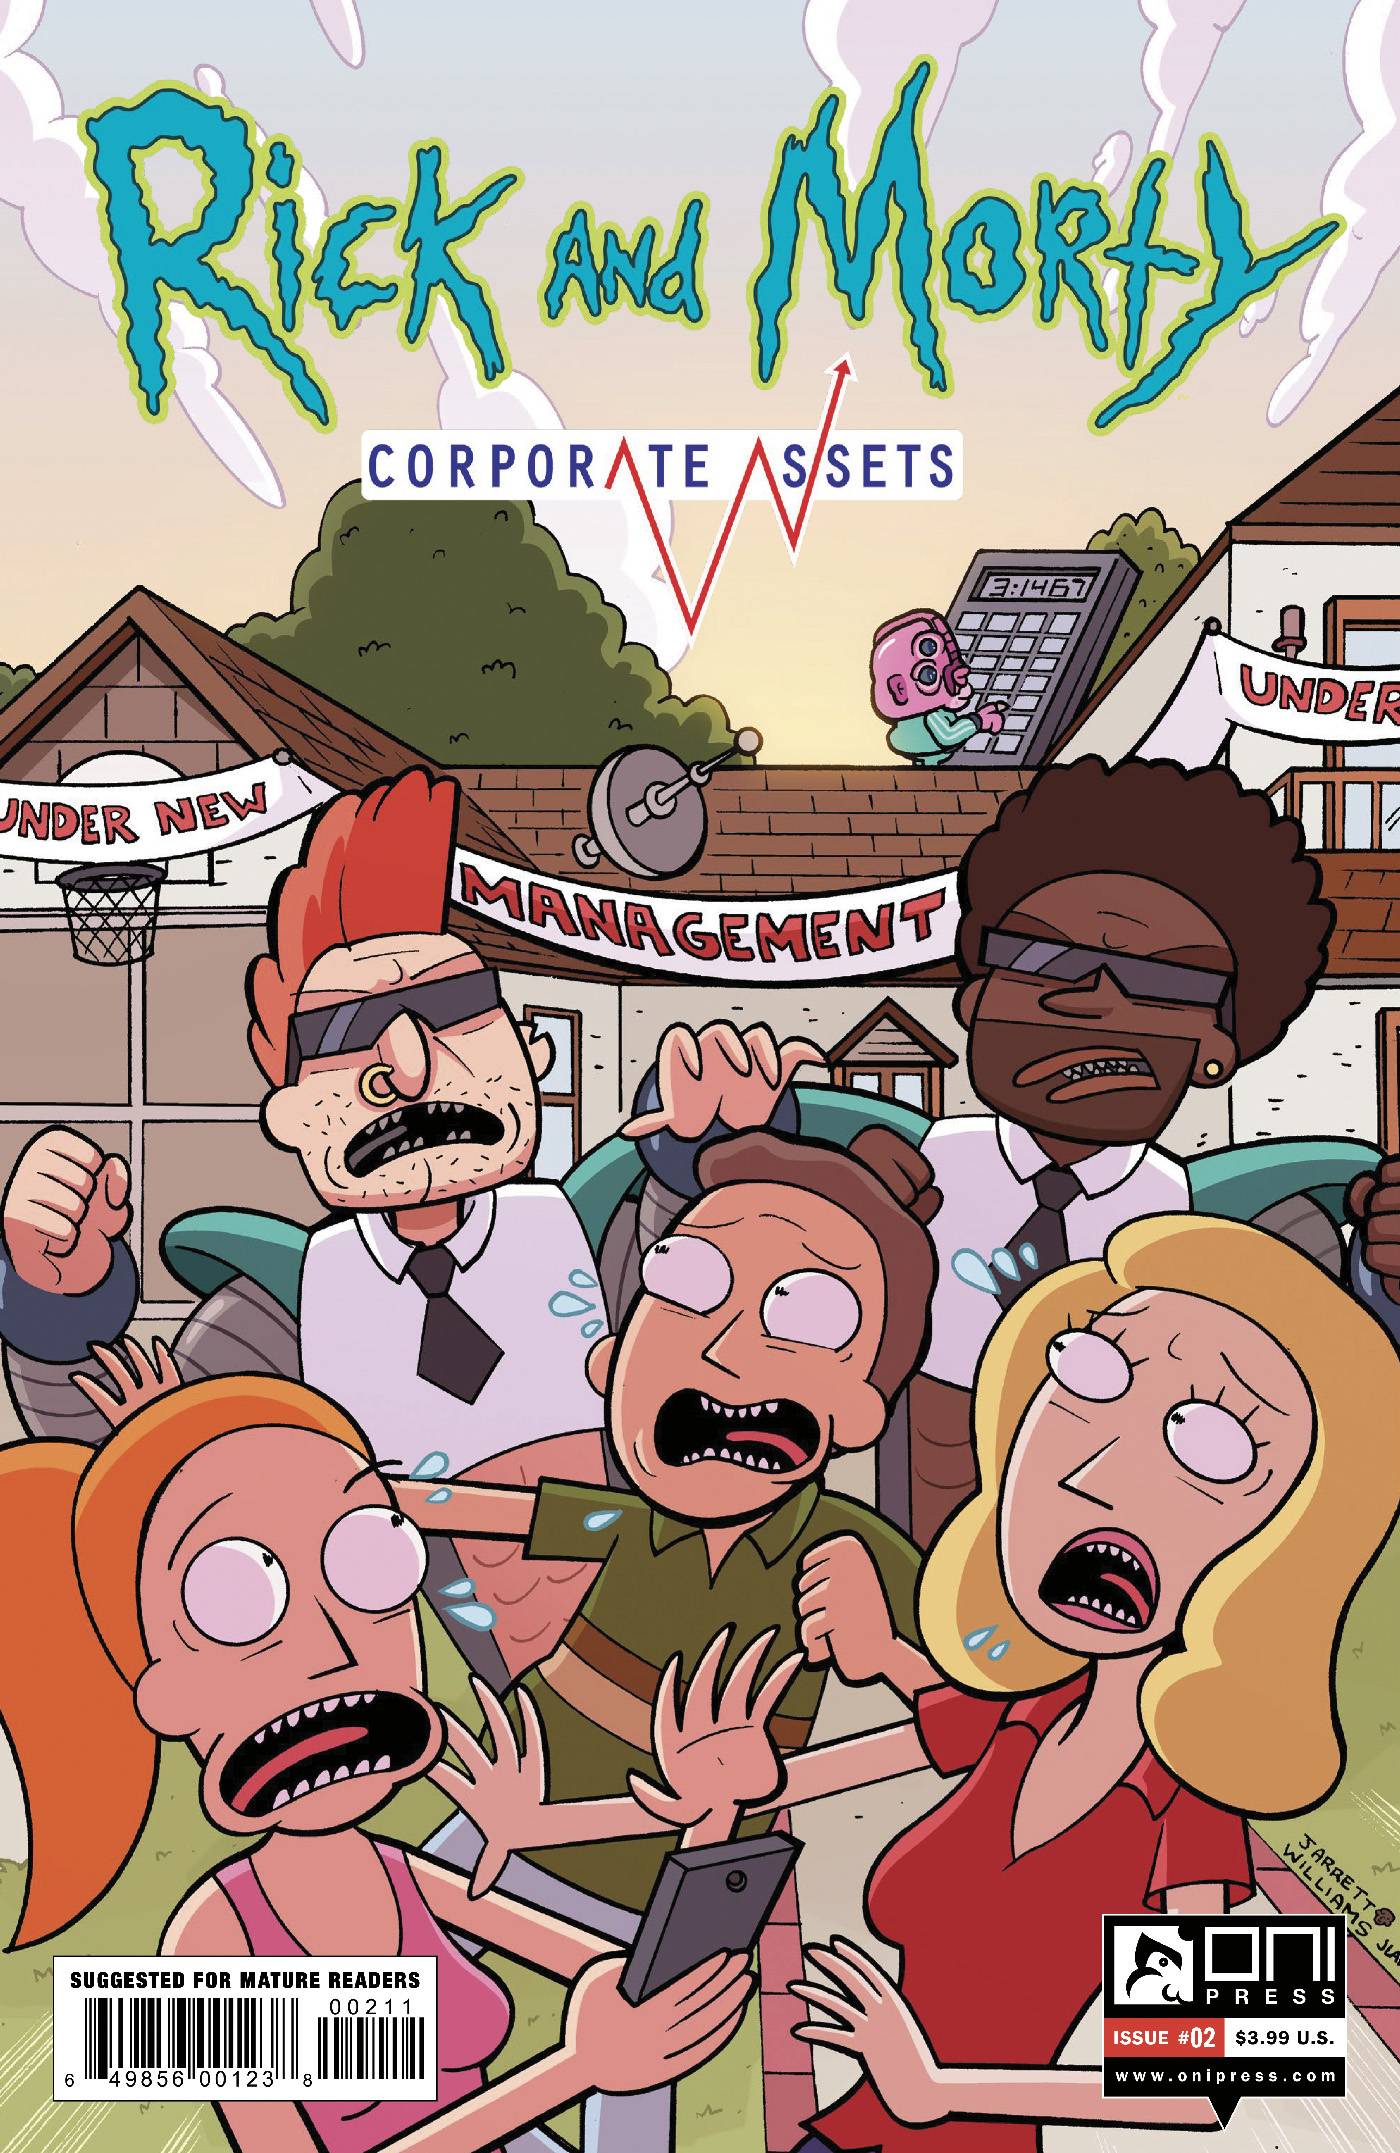 RICK AND MORTY CORPORATE ASSESTS